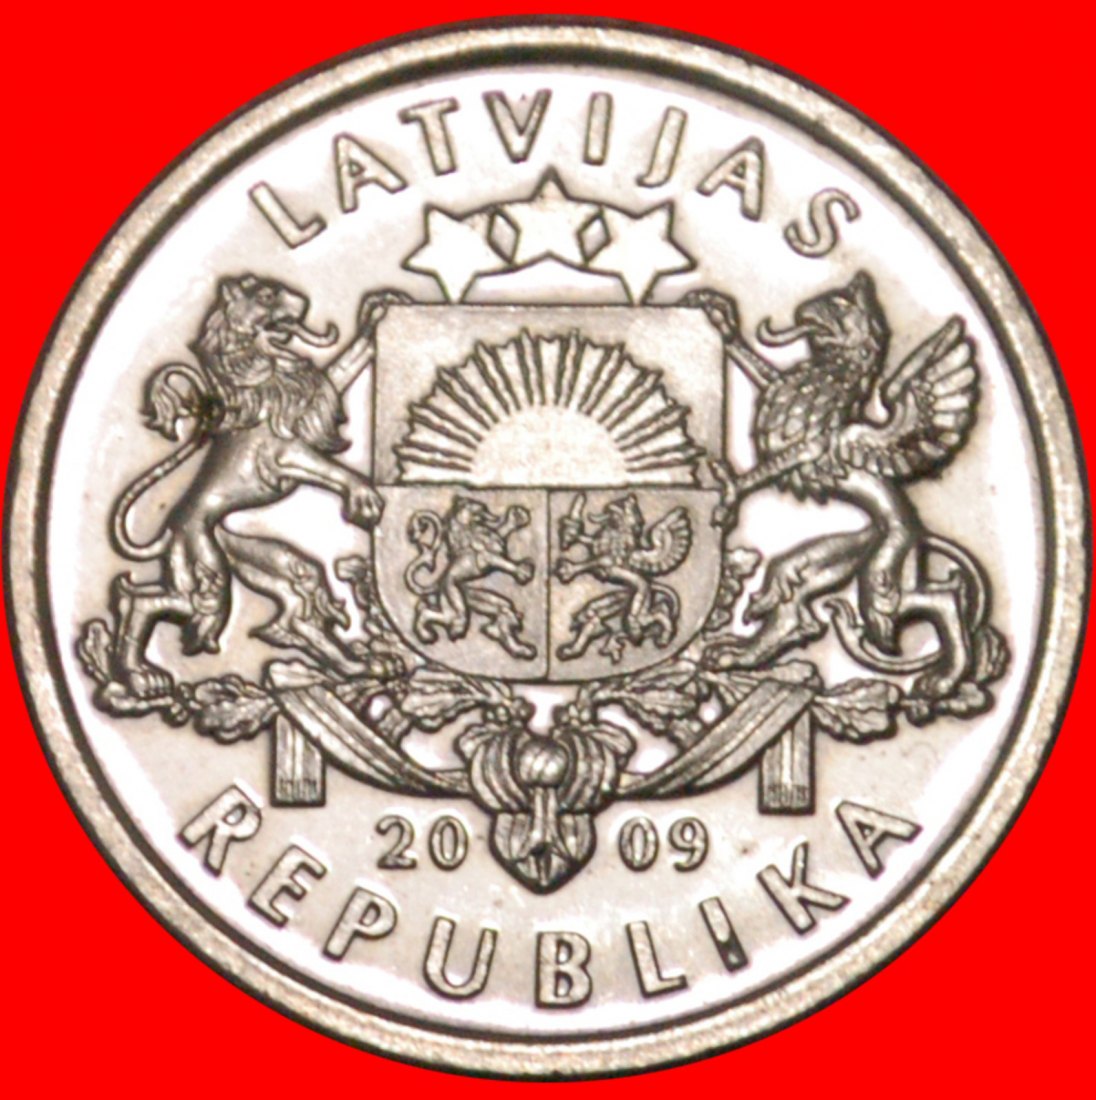  • GERMANY: latvia (ex. USSR, russia) ★ 1 LAT 2009 MINT LUSTER! LOW START ★ NO RESERVE!   